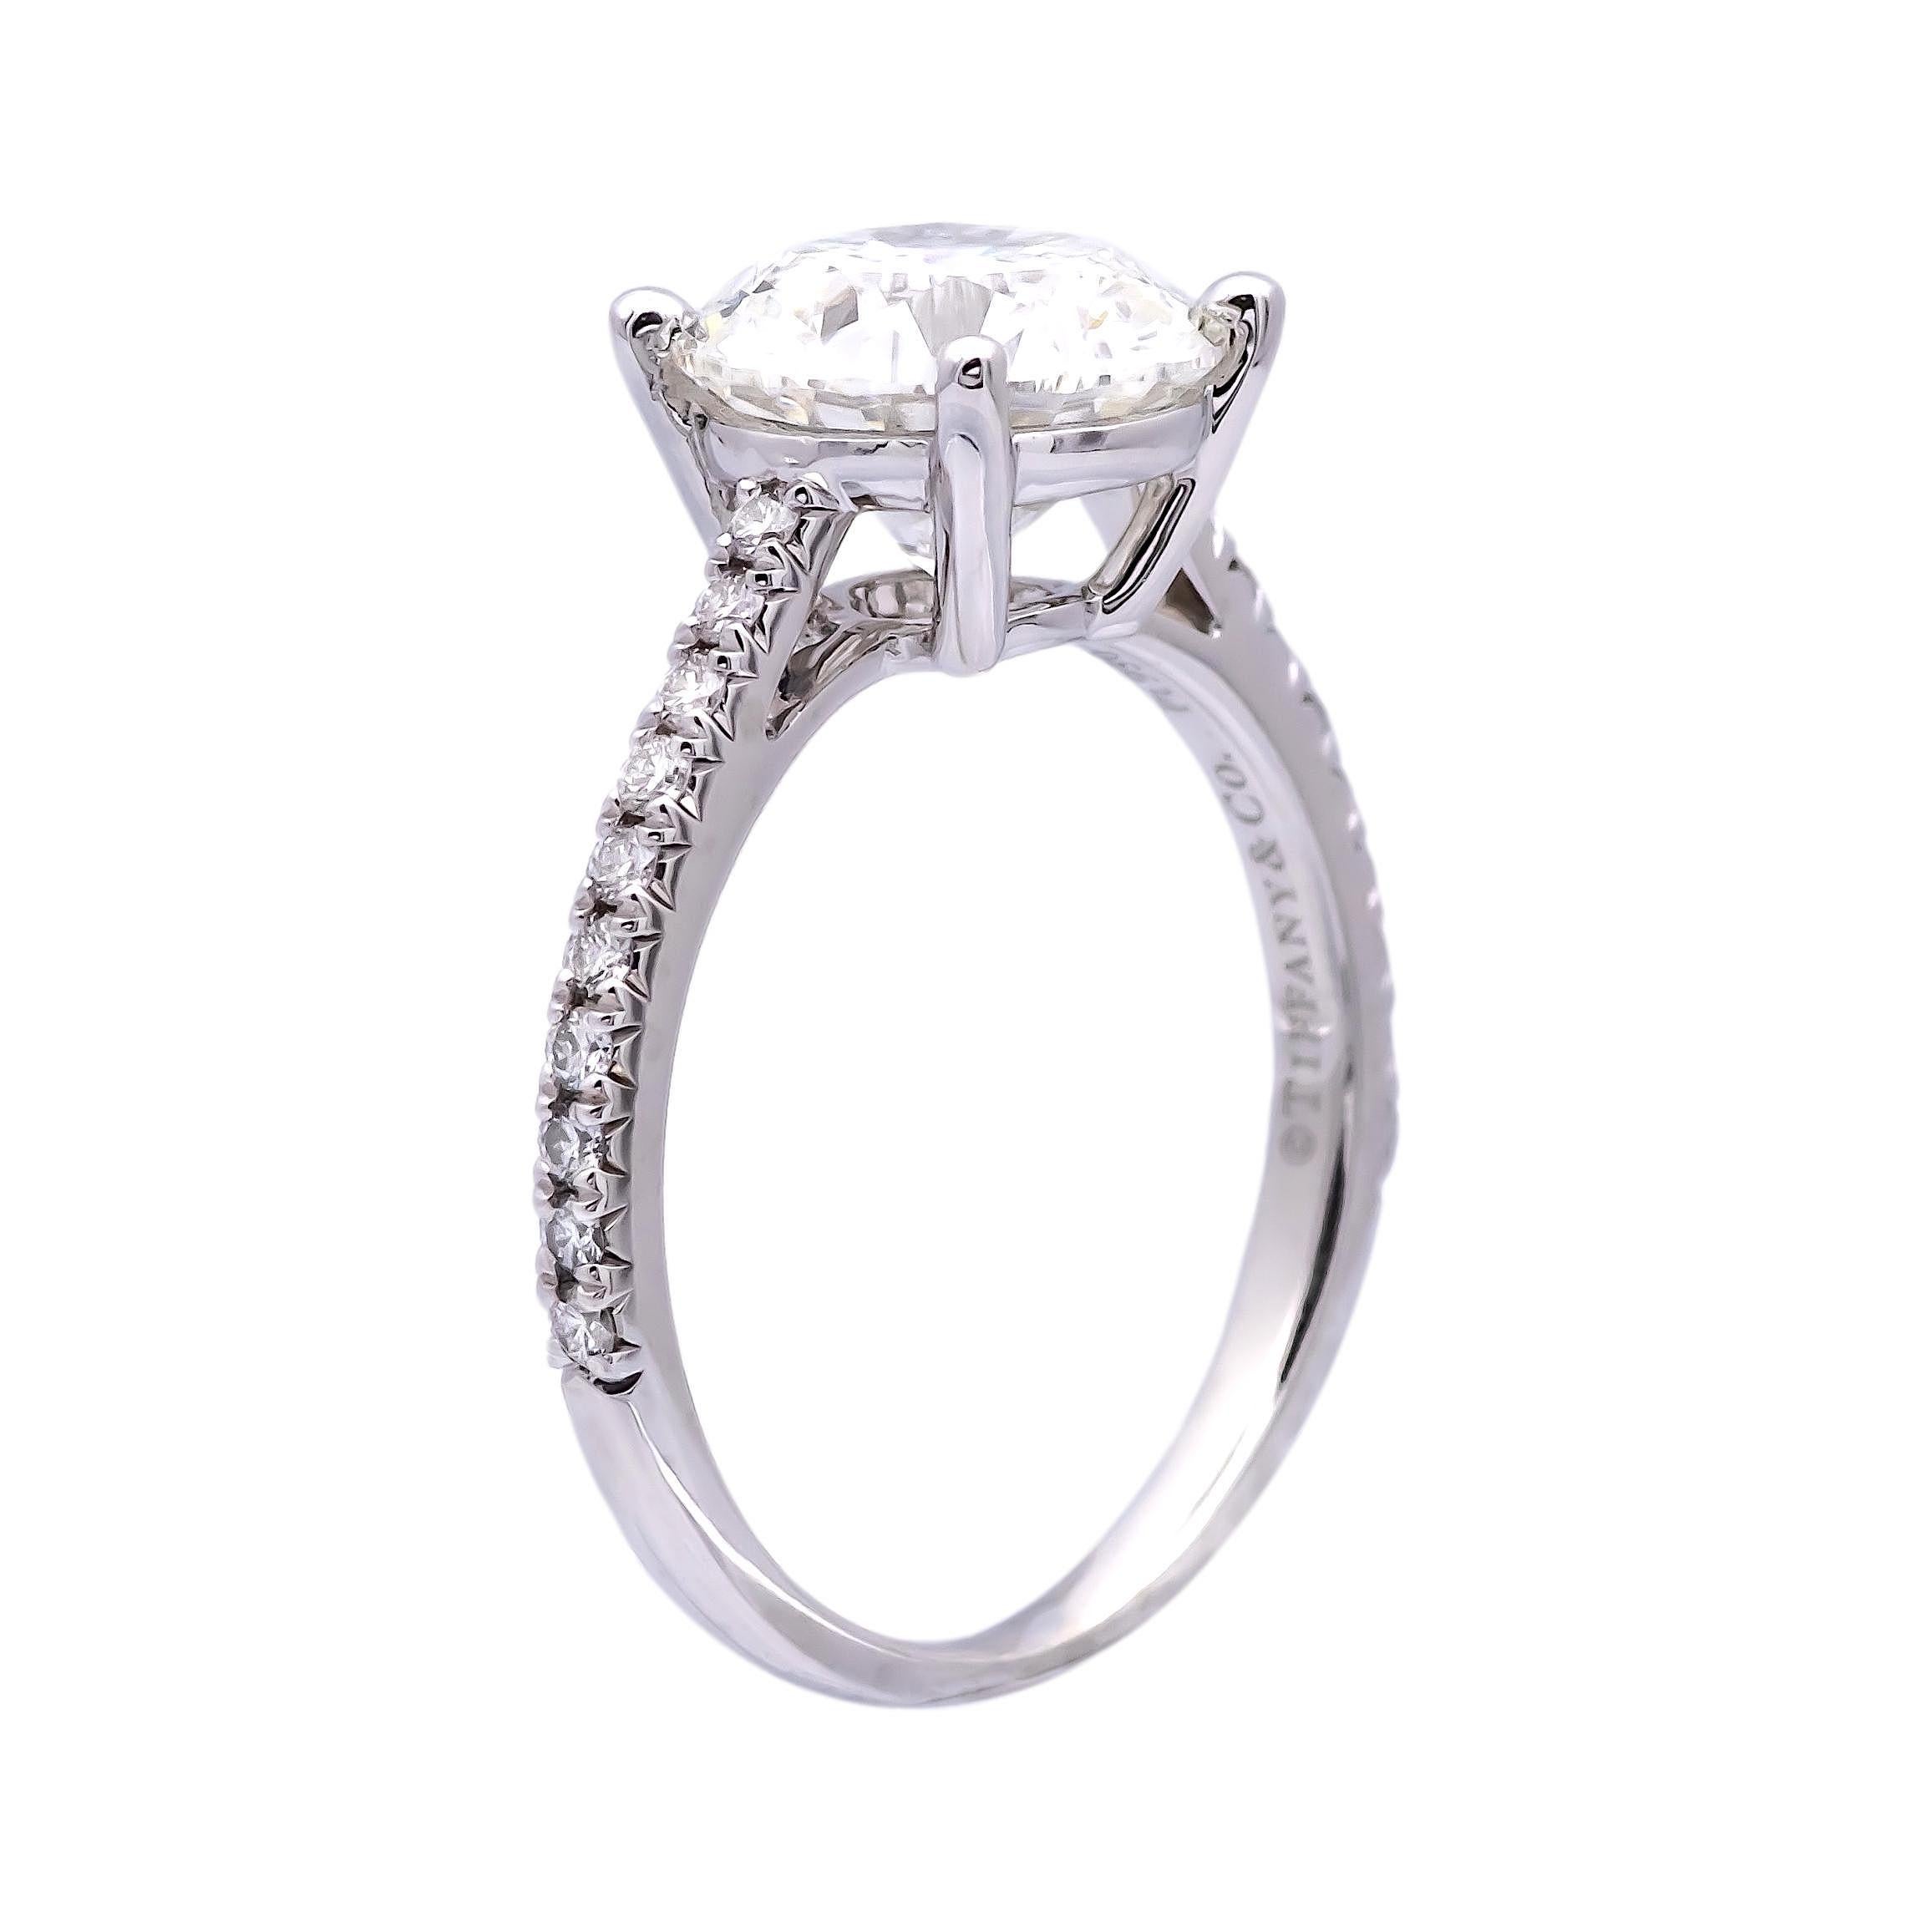 Tiffany & Co. engagement ring from the Novo collection finely crafted in platinum featuring a round brilliant cut diamond center weighing 2.39 carats , G color , VS2 clarity set in a 4 prong basket setting with airline and adorned with 16 bead set